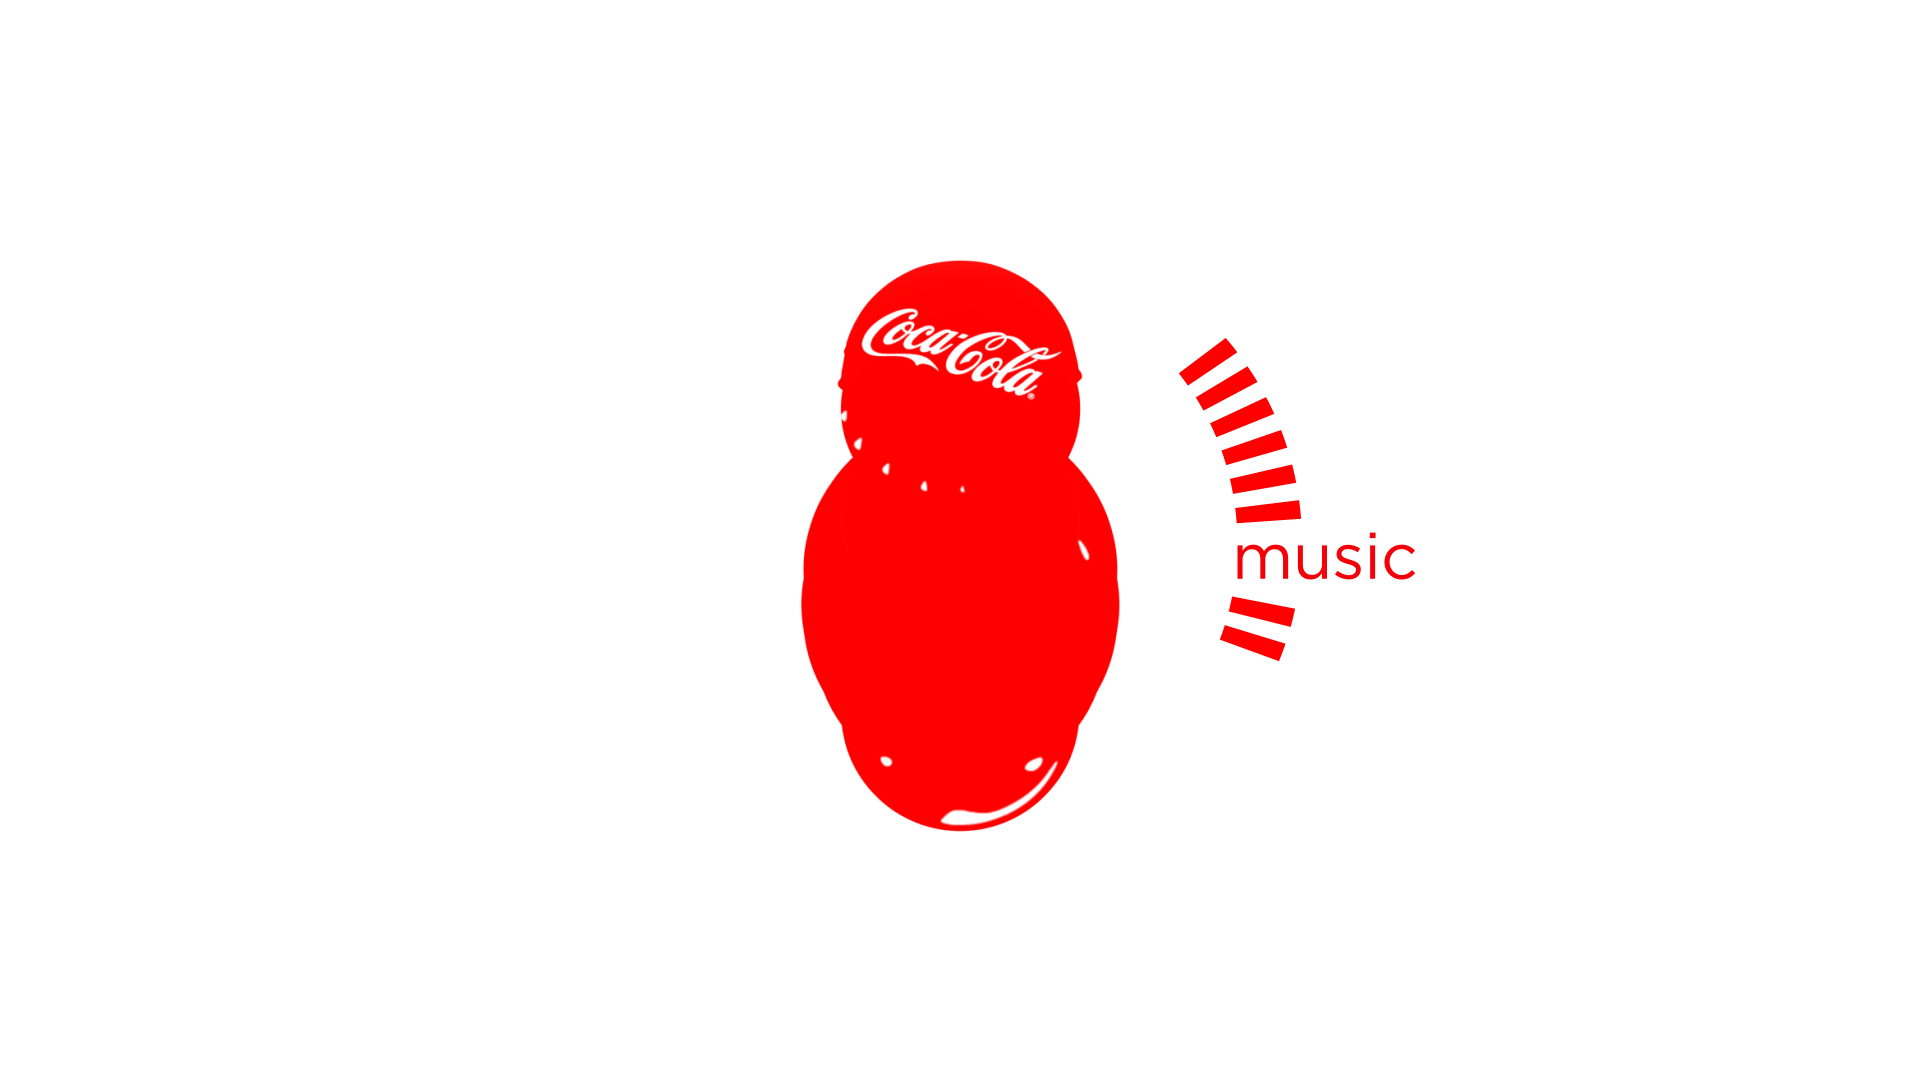 COK_Music_Images_00008.png